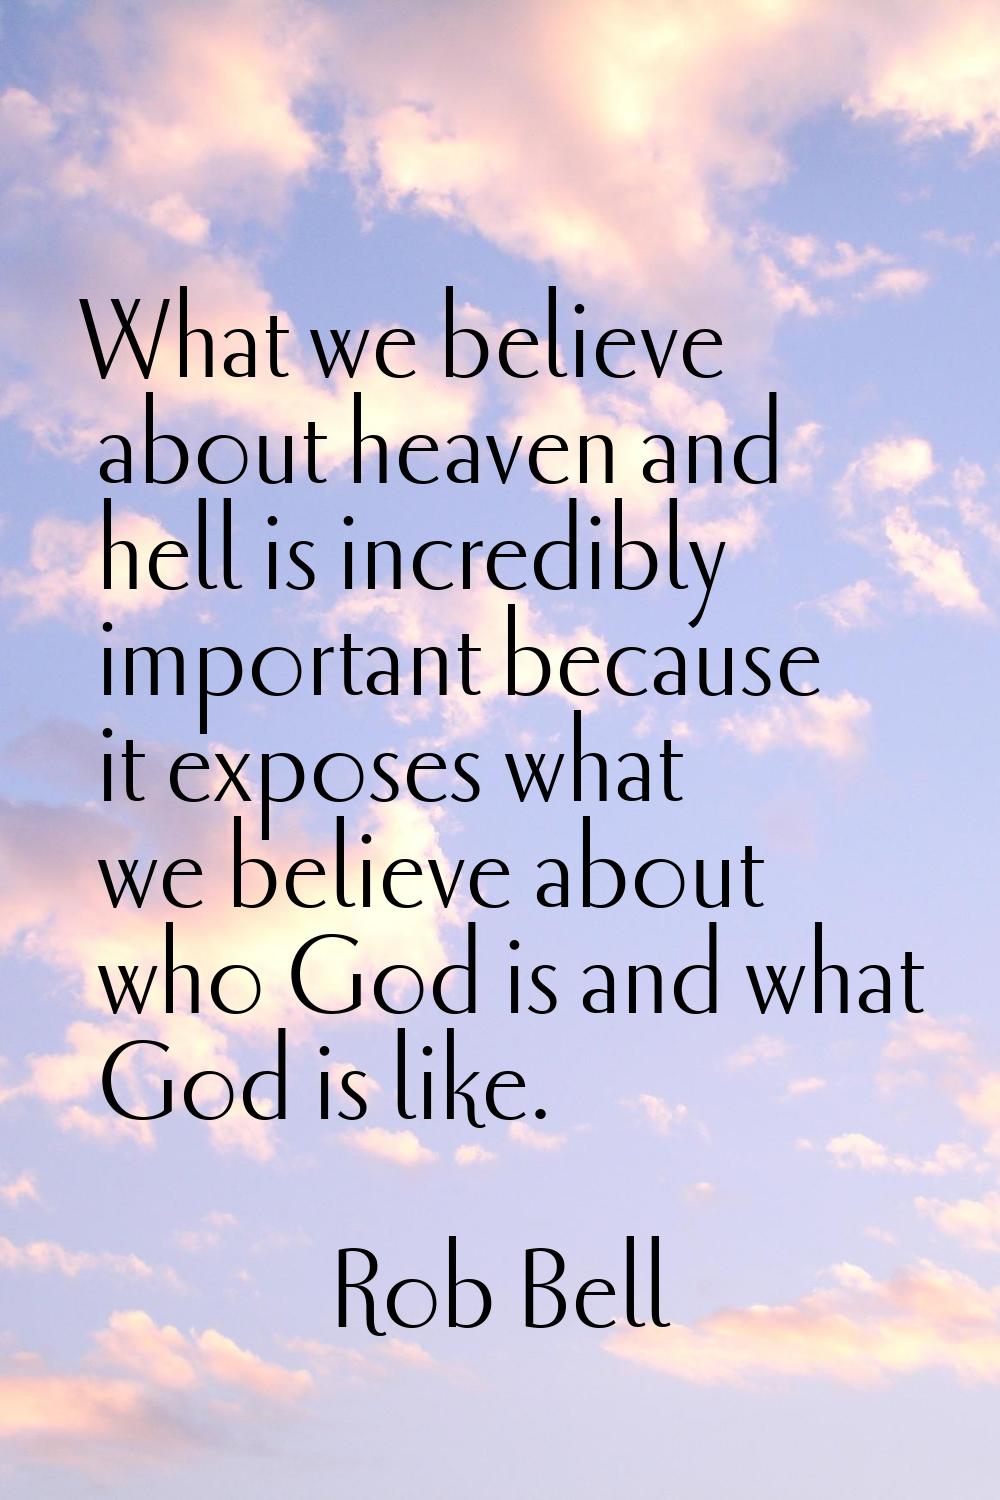 What we believe about heaven and hell is incredibly important because it exposes what we believe ab